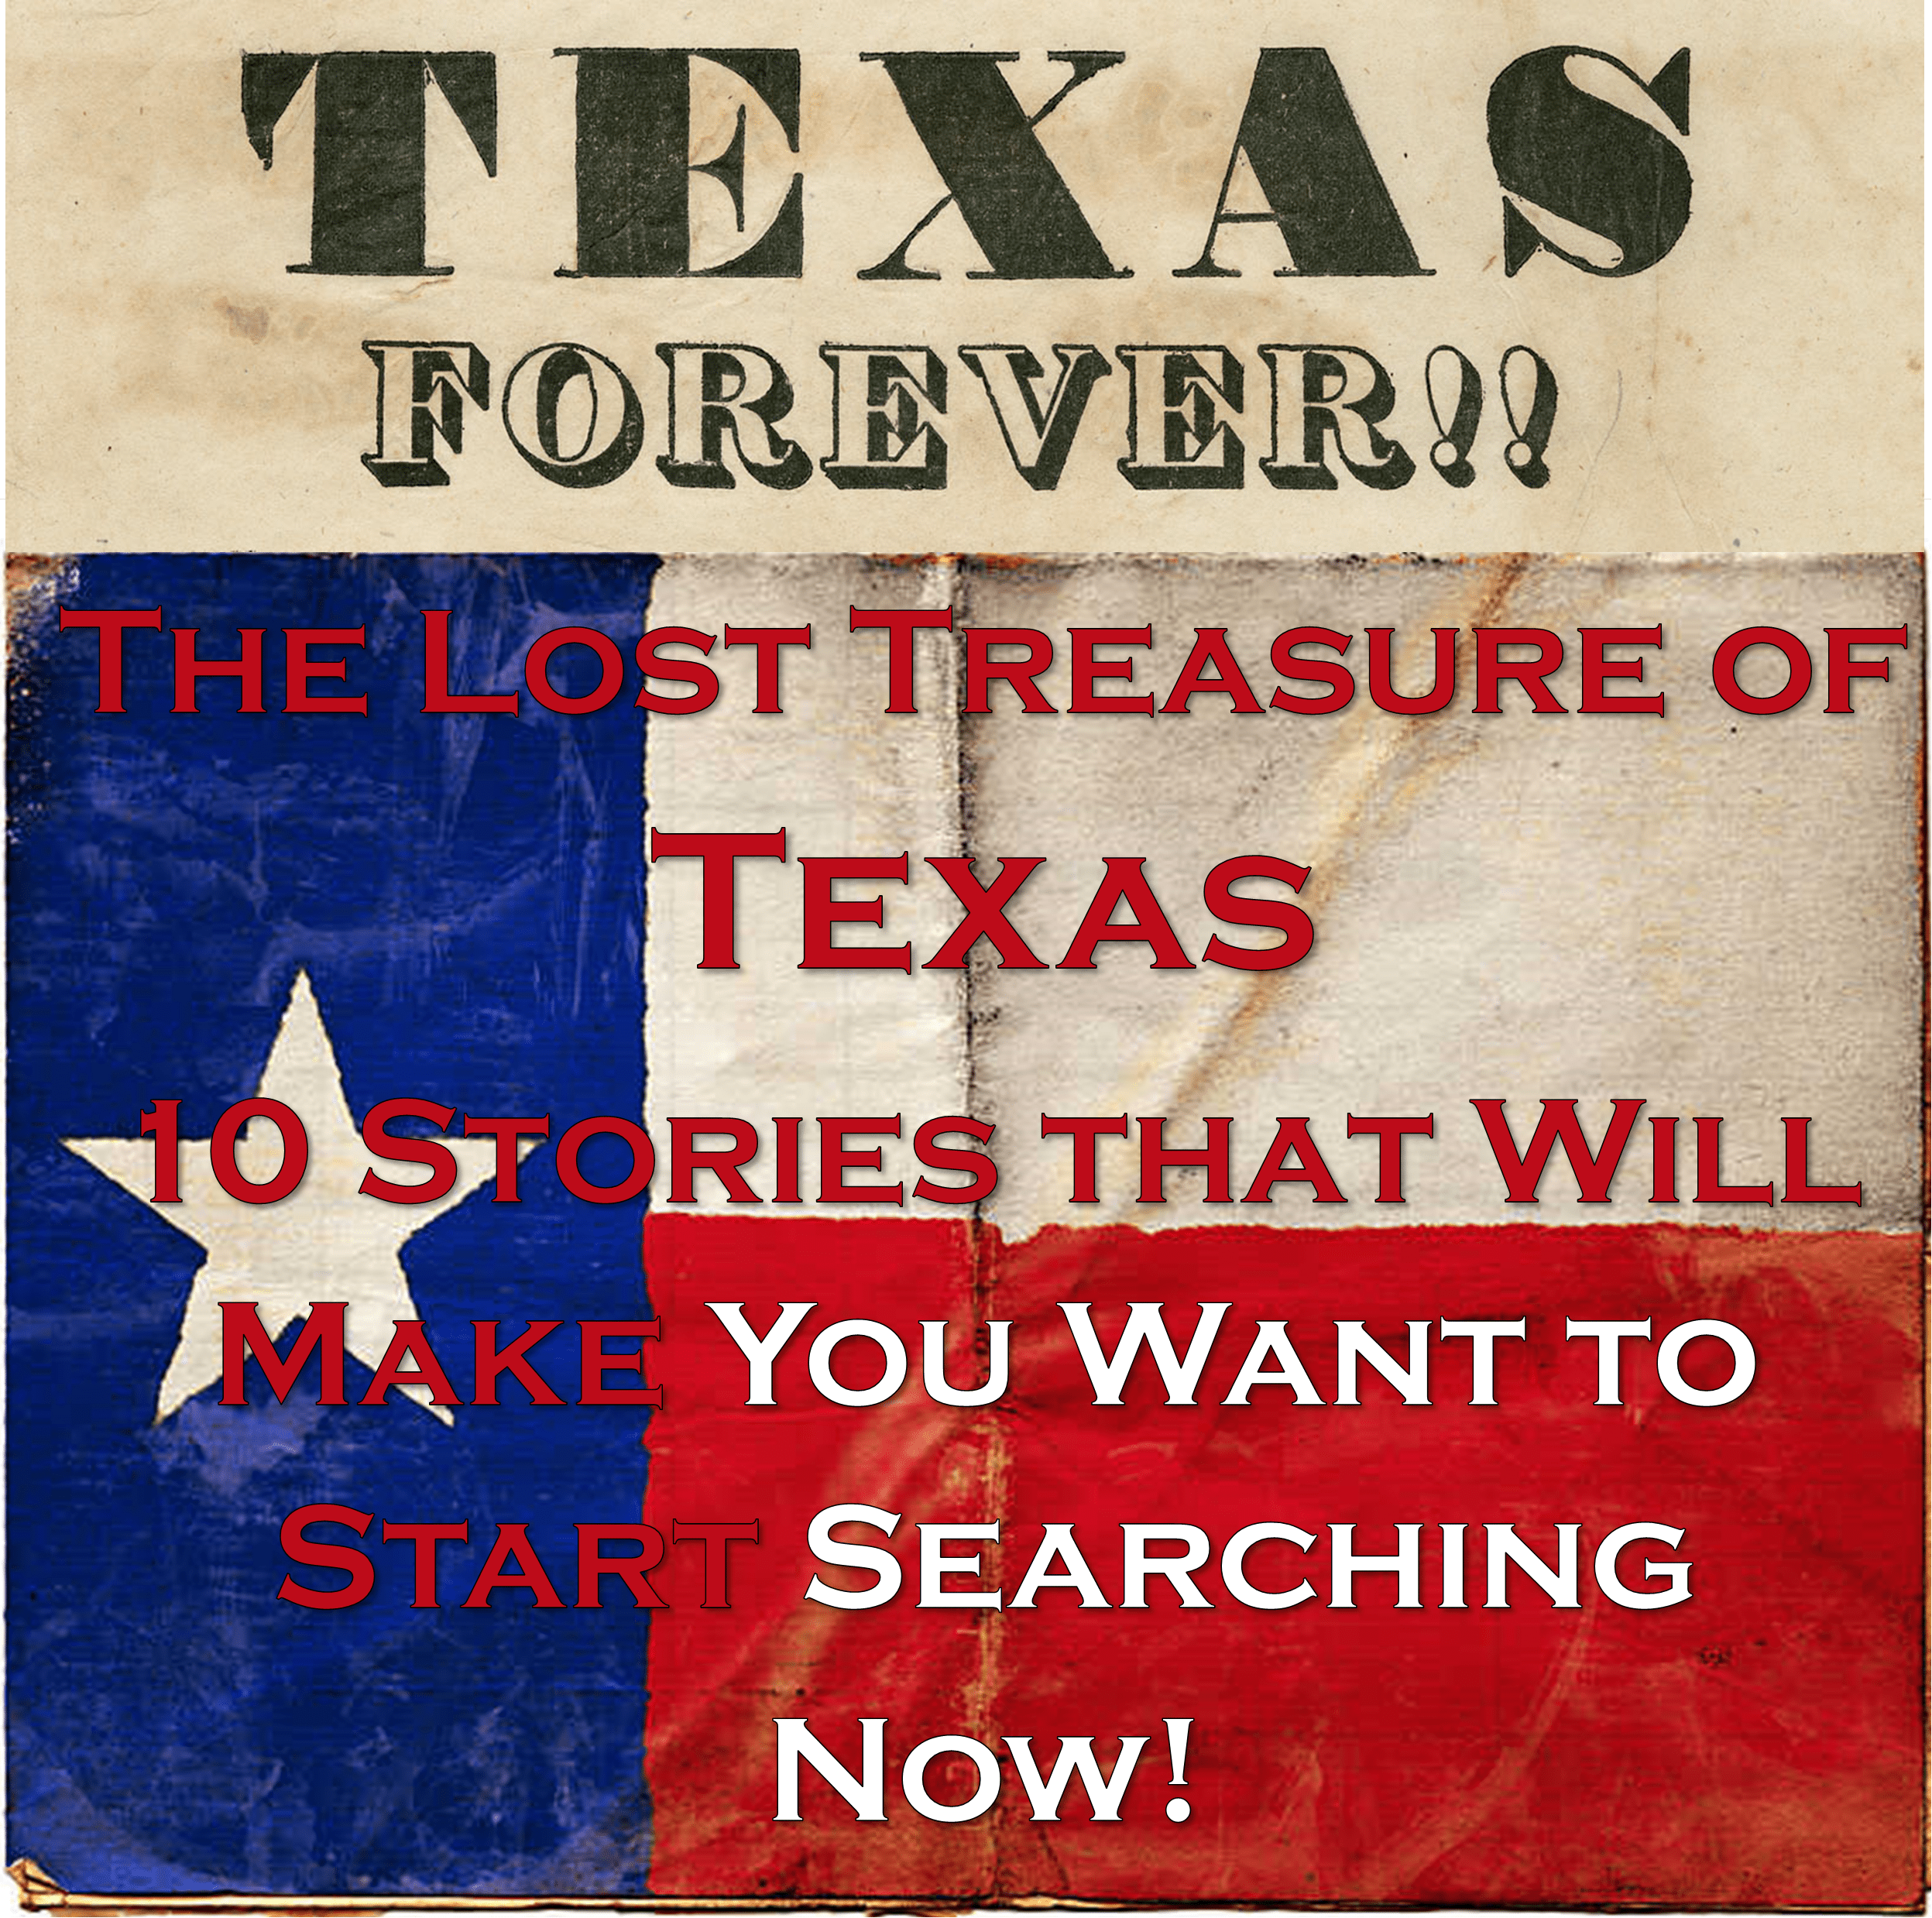 The Lost Treasure of Texas - 10 Stories that Will Make You Want to Start Searching Now!